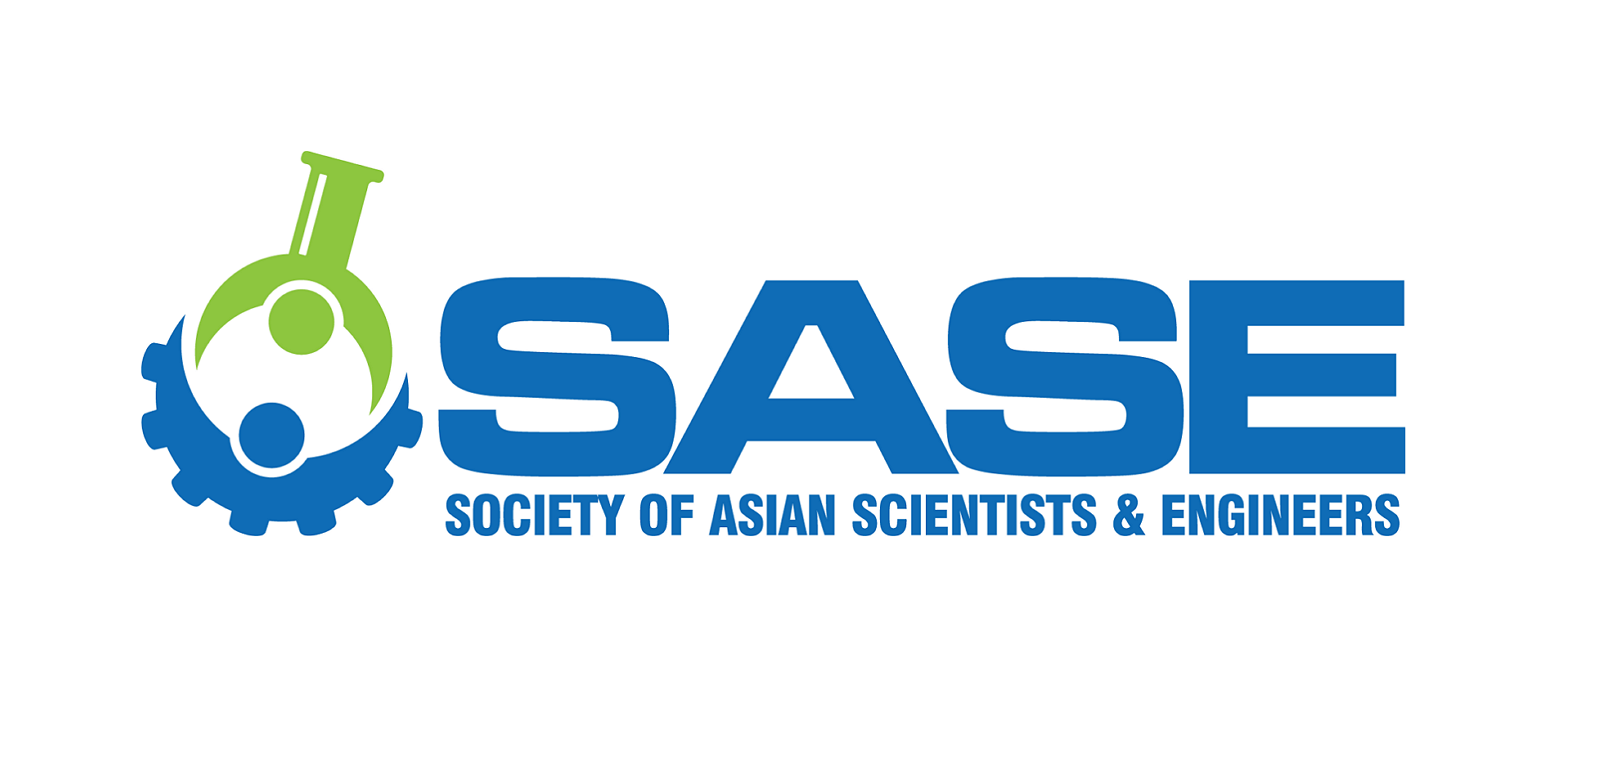 Society of Asian Scientists and Engineers (SASE) logo.